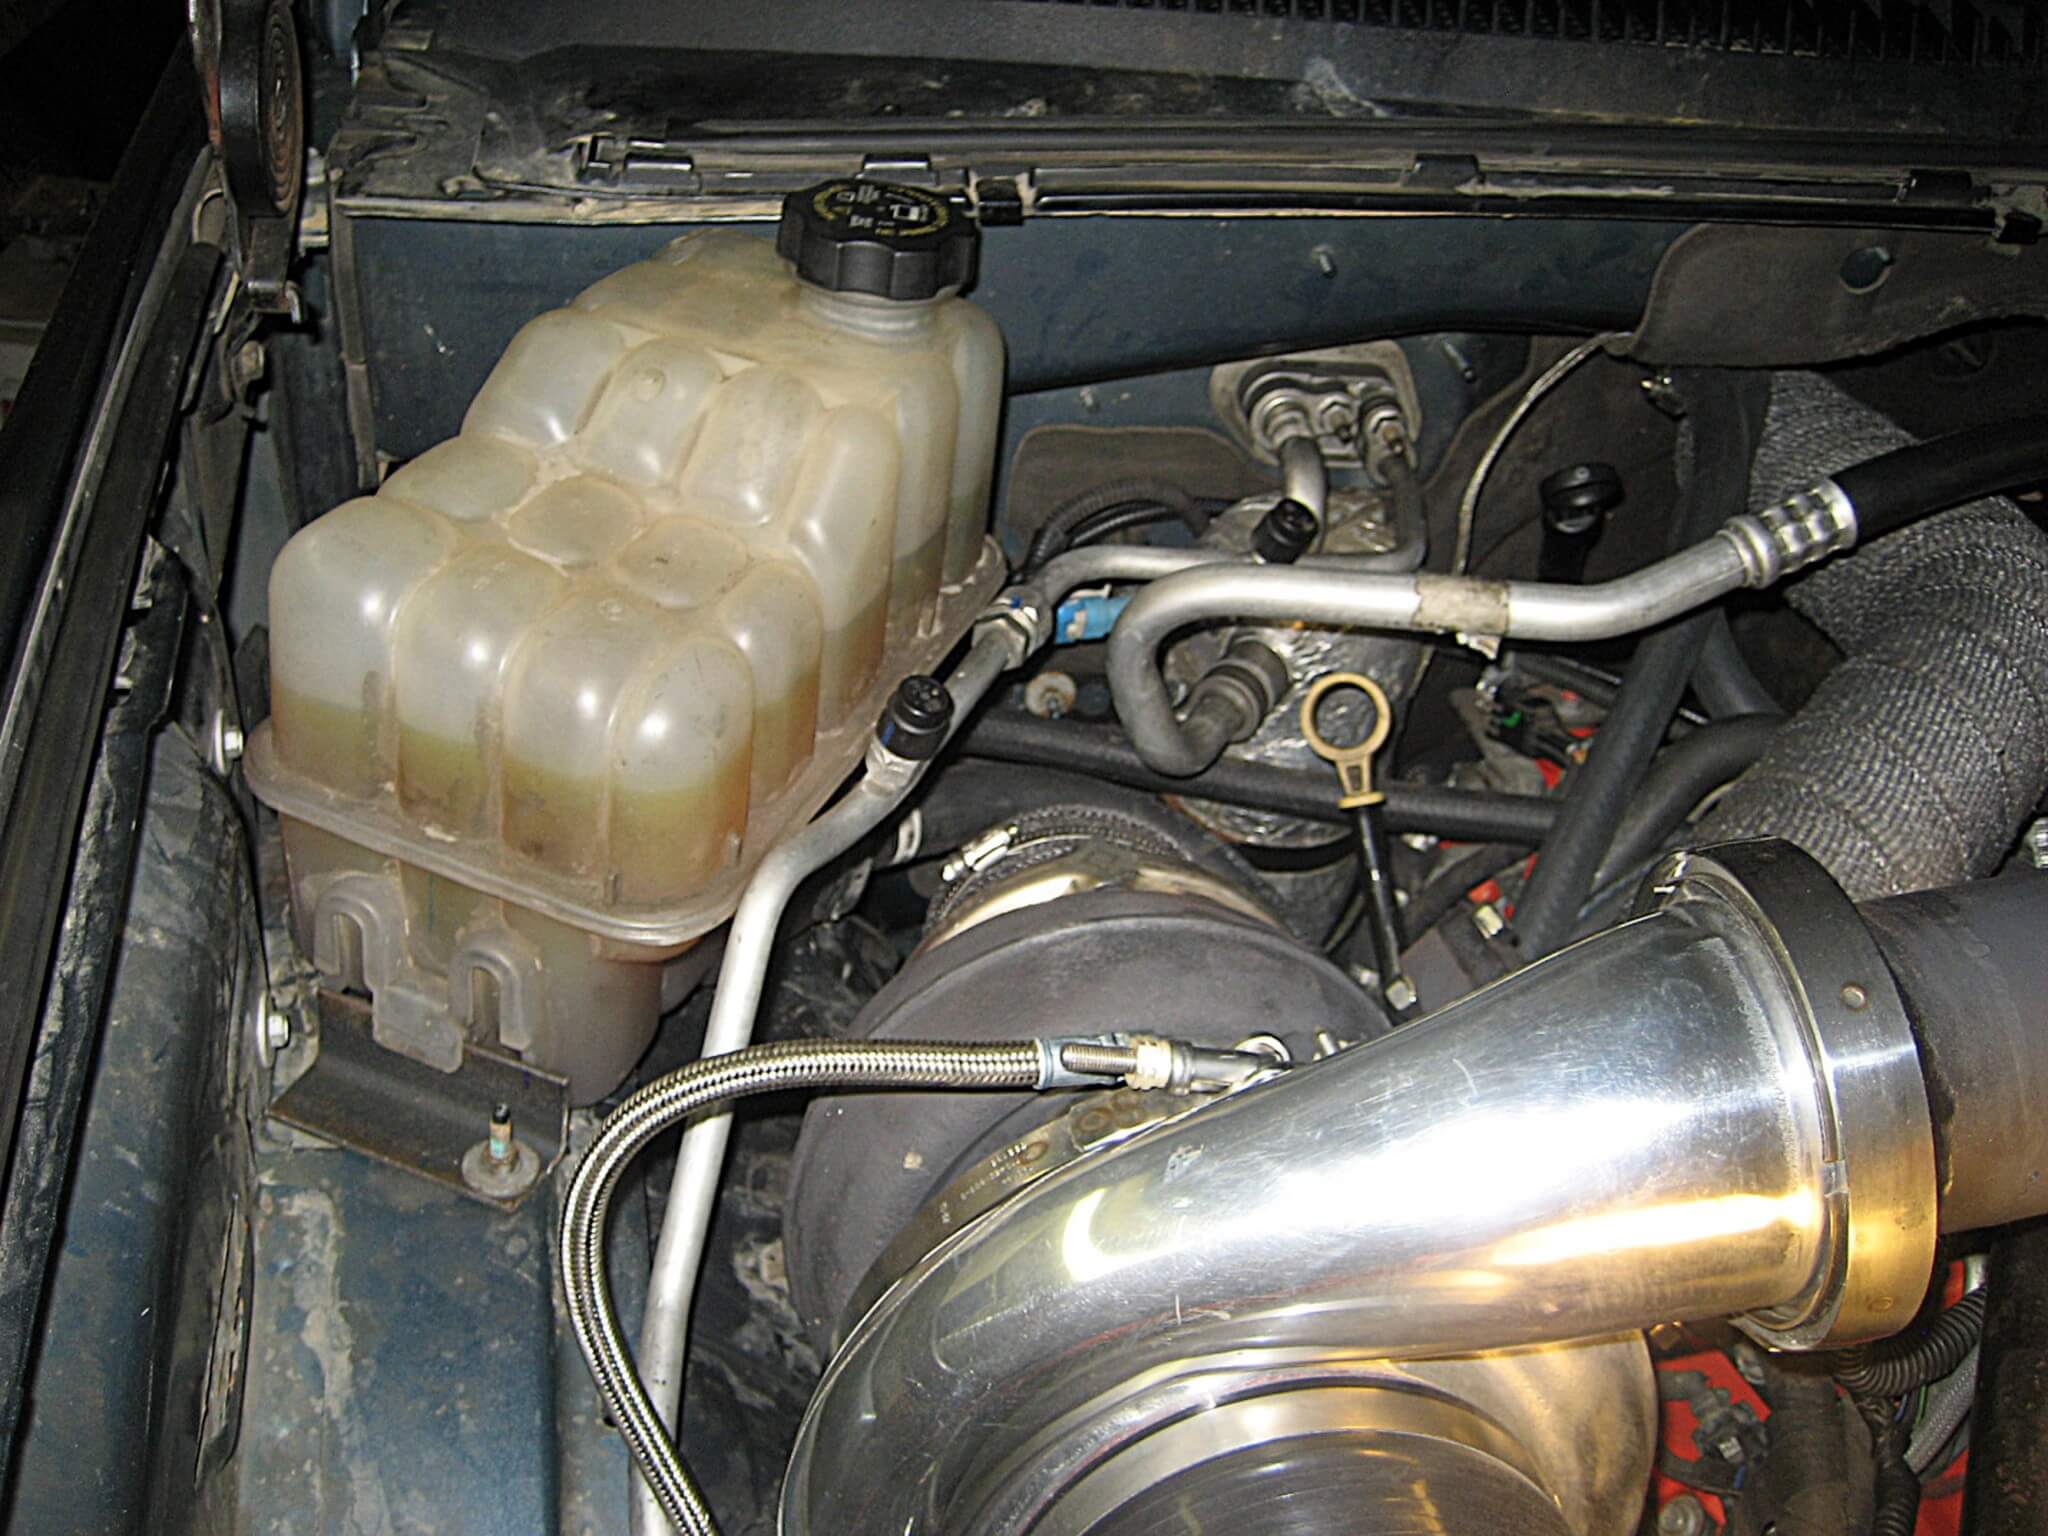 2. This Duramax-equipped truck was upgraded to a dual-turbo setup. Unfortunately, this required the second battery to be eliminated to make room for the coolant bottle. The result is less reserve capacity for low rpm running. A better alternator was a must for this owner to offset the single battery disadvantage. 